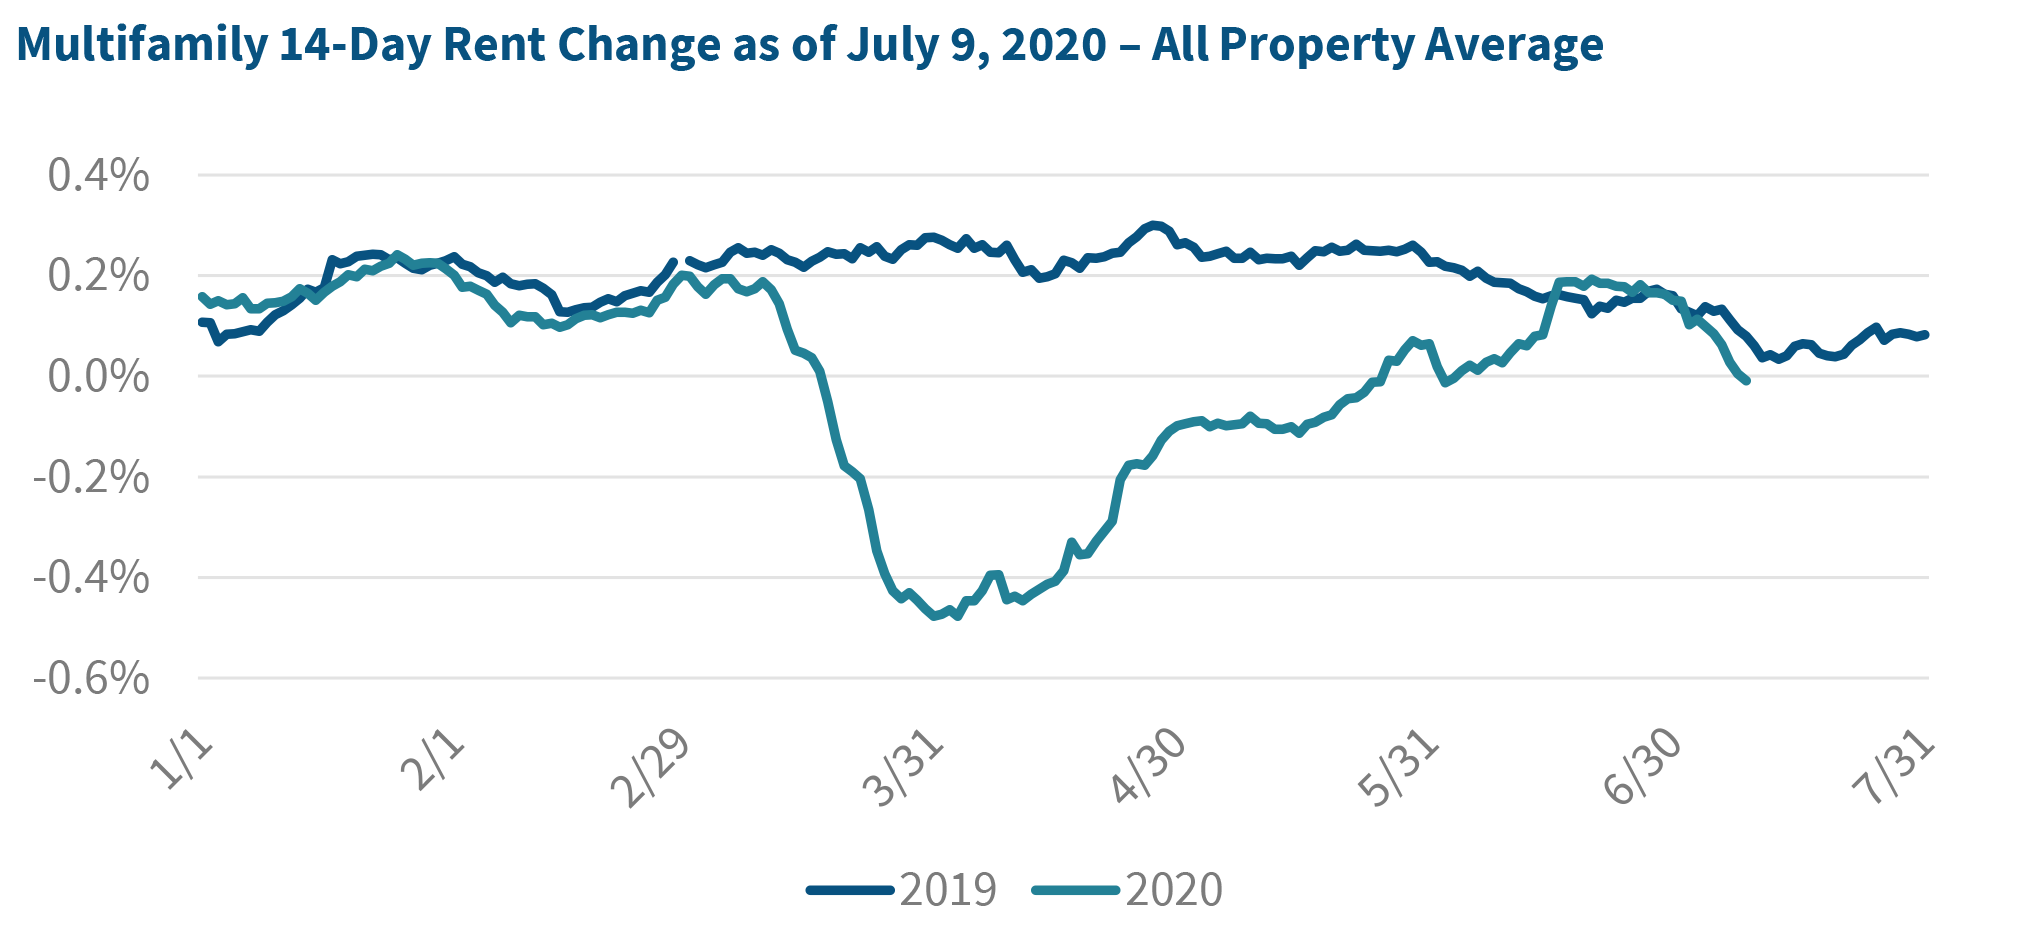 Multifamily 14-Day Rent Change as of July 9, 2020 – All Property Average